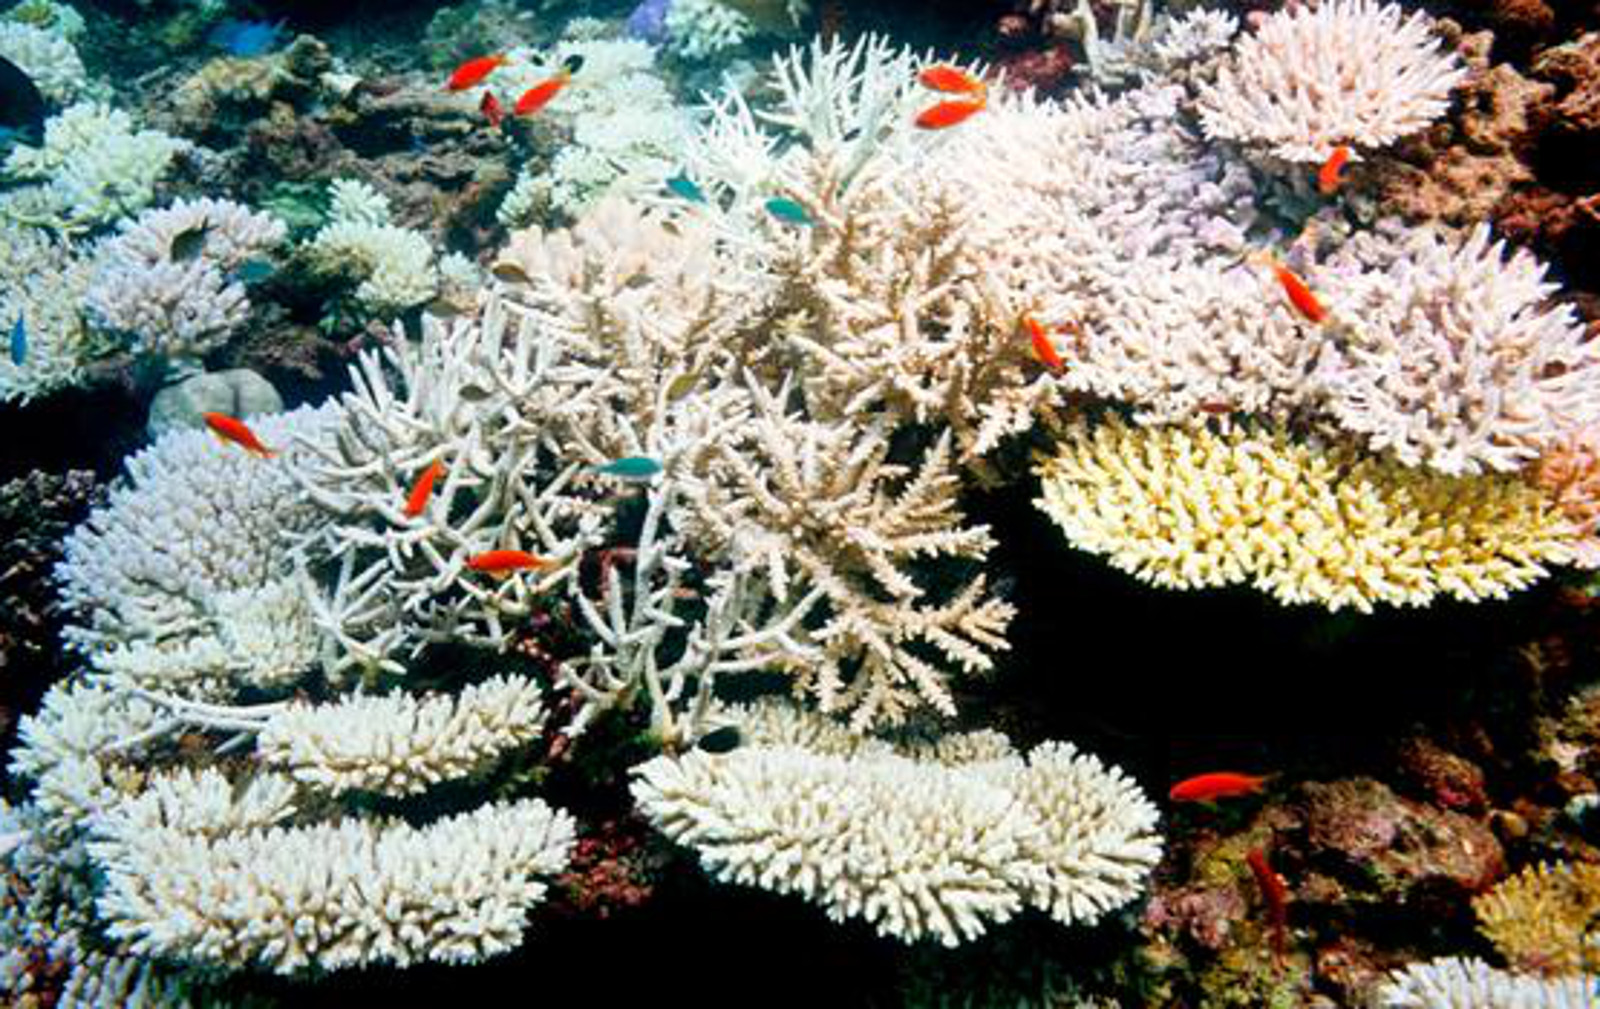 5 Species We Stand to Lose if Coral Reefs are Destroyed